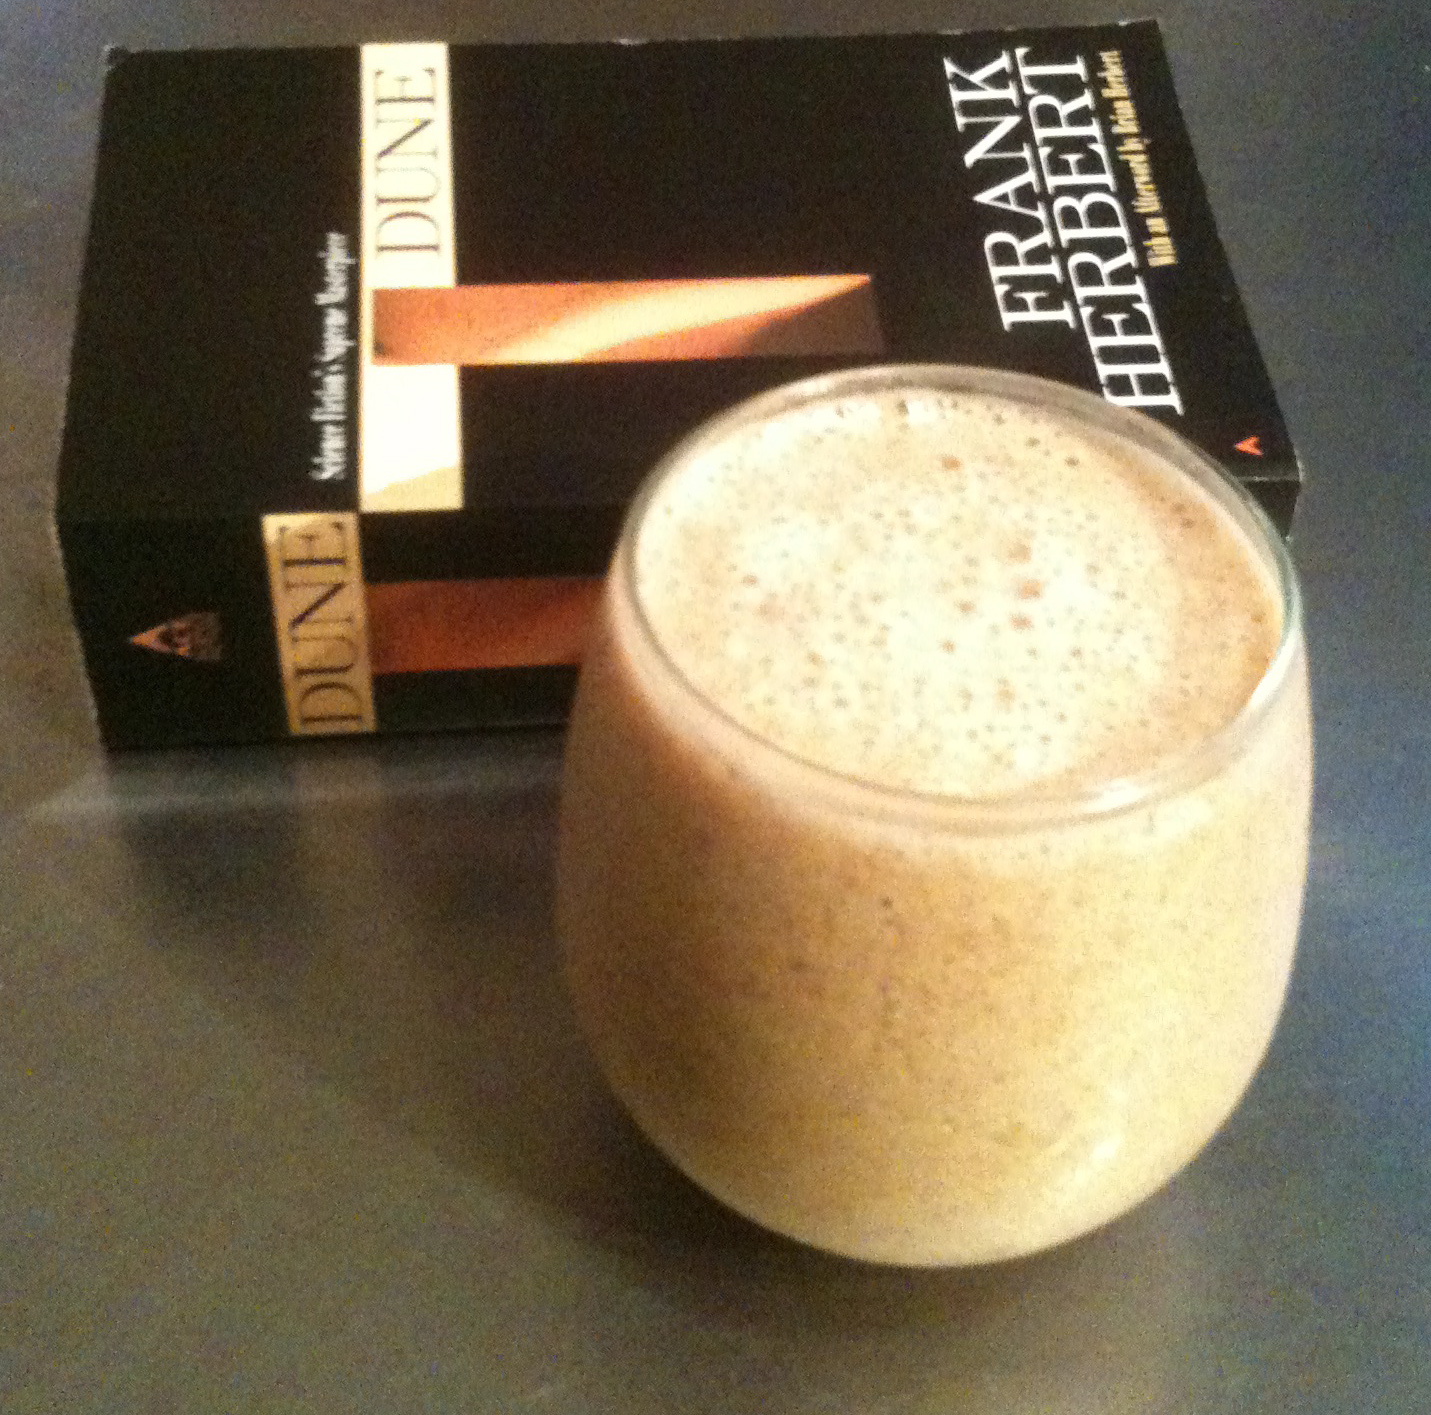 vegankind: A smoothie and book pairing